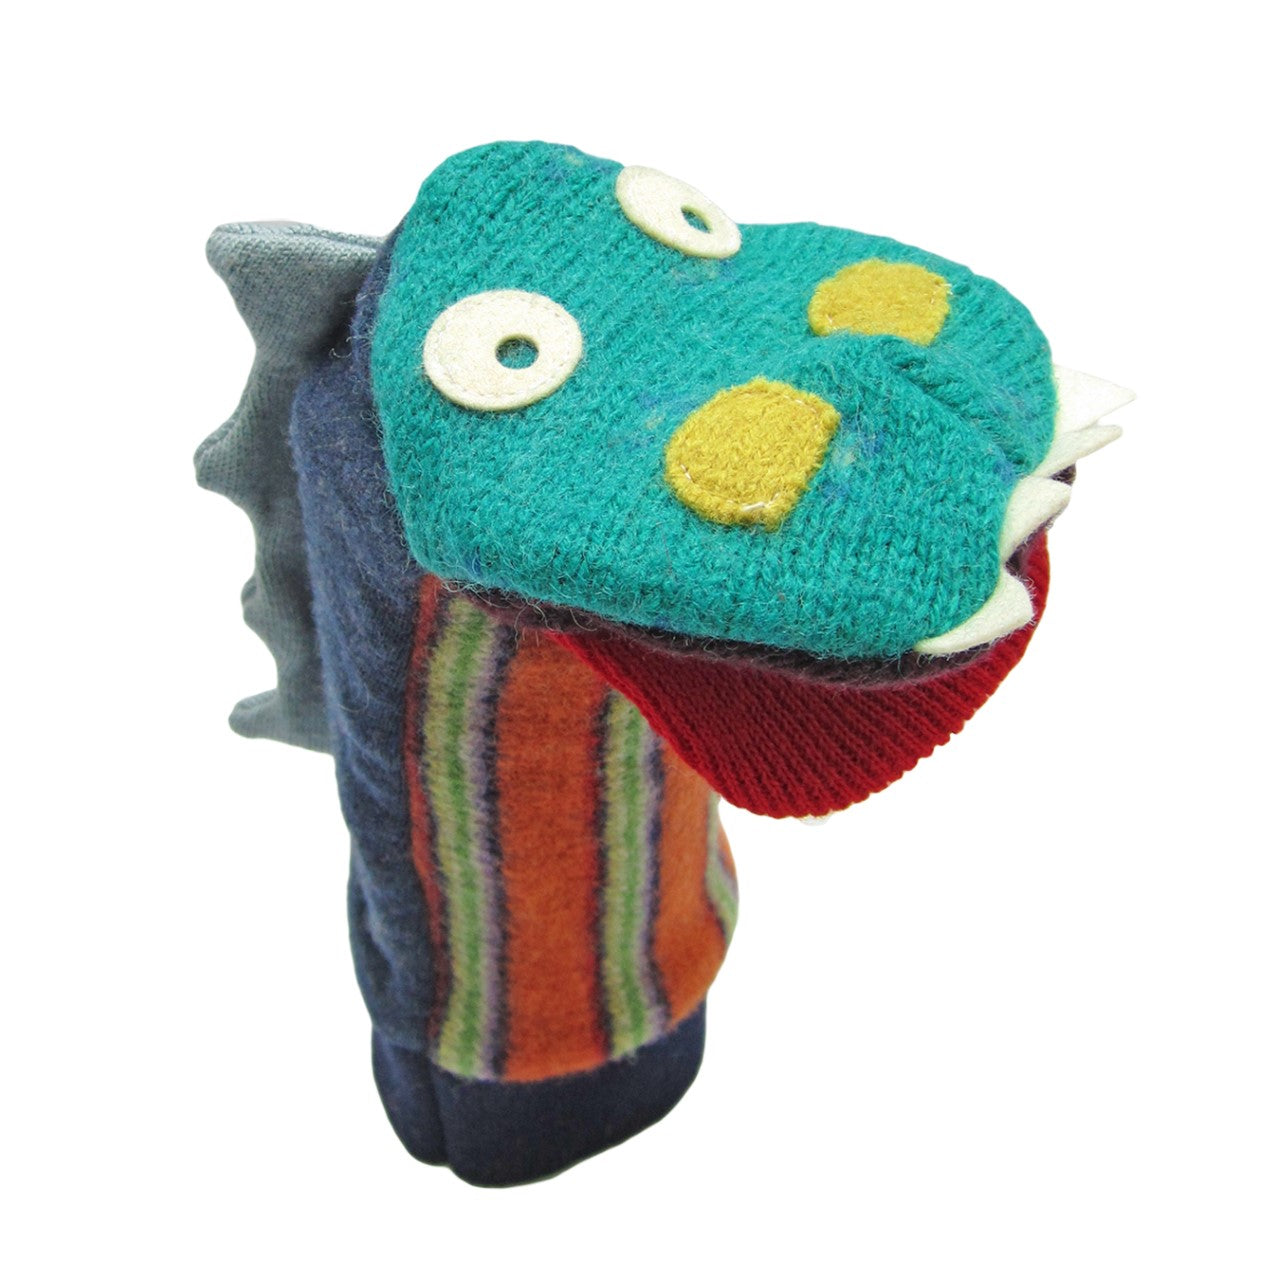 Dinosaur Puppet from Reclaimed Wool